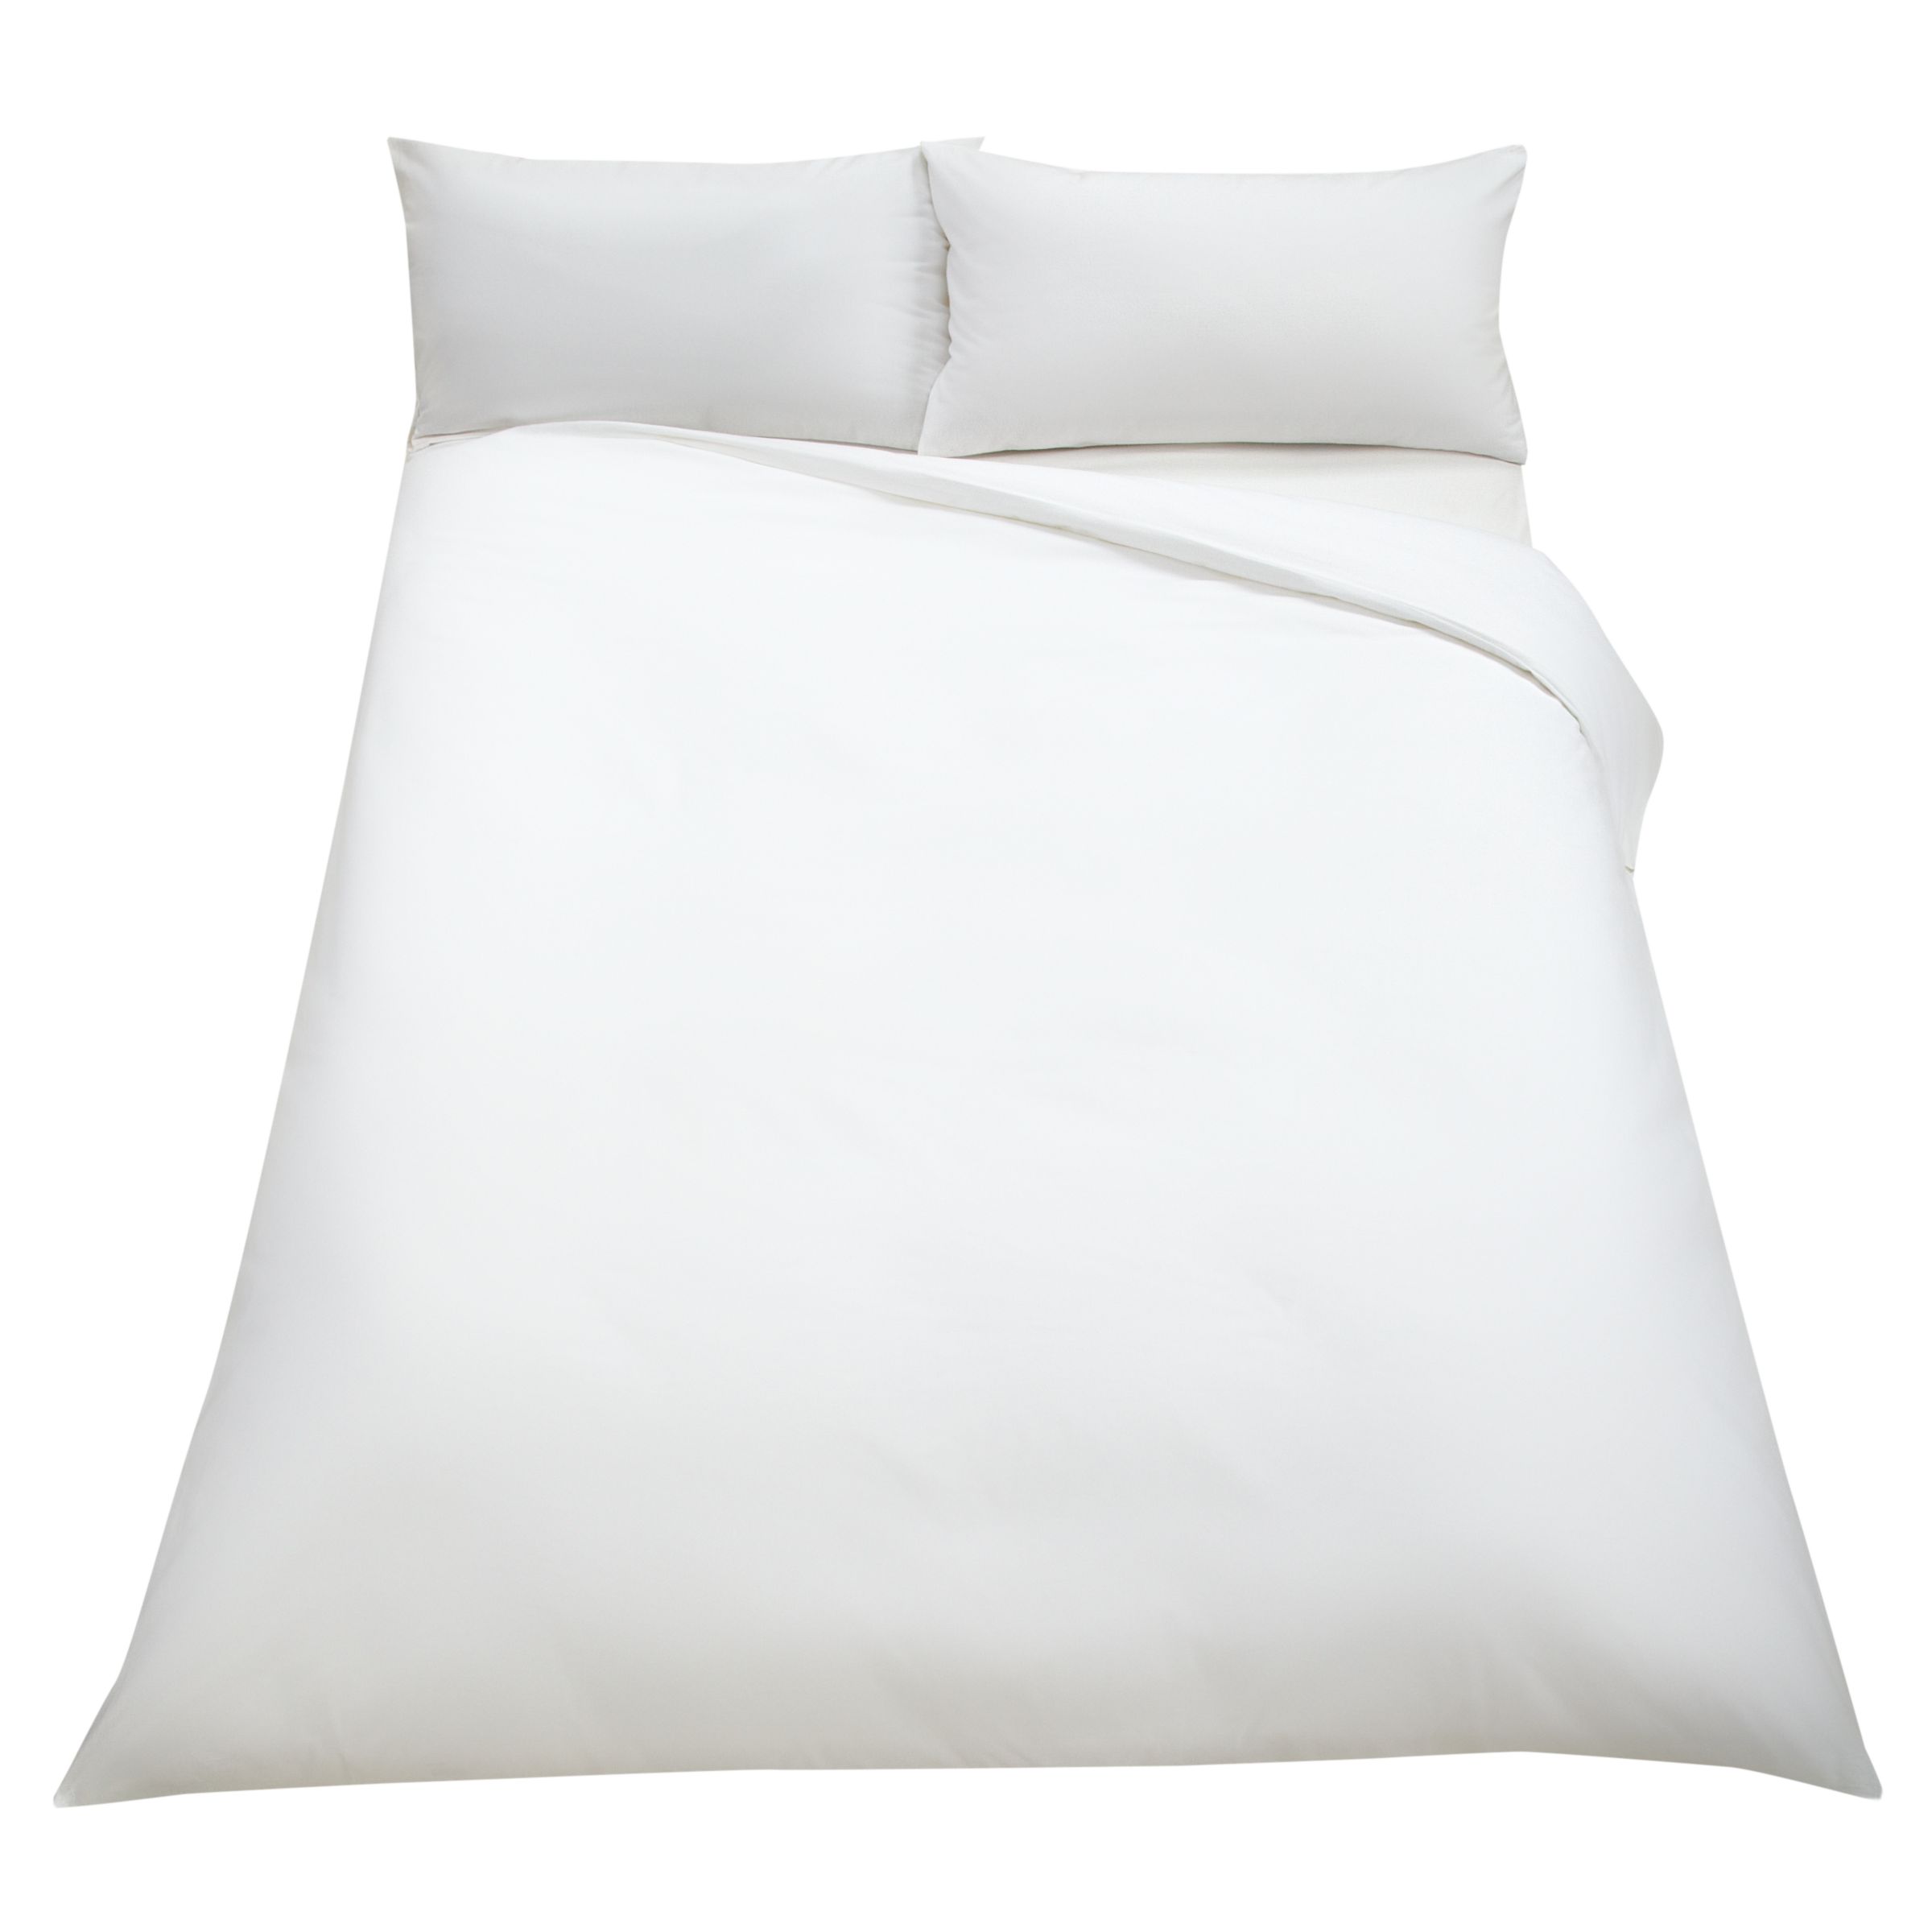 Soft & Cosy Flannelette Bedding,